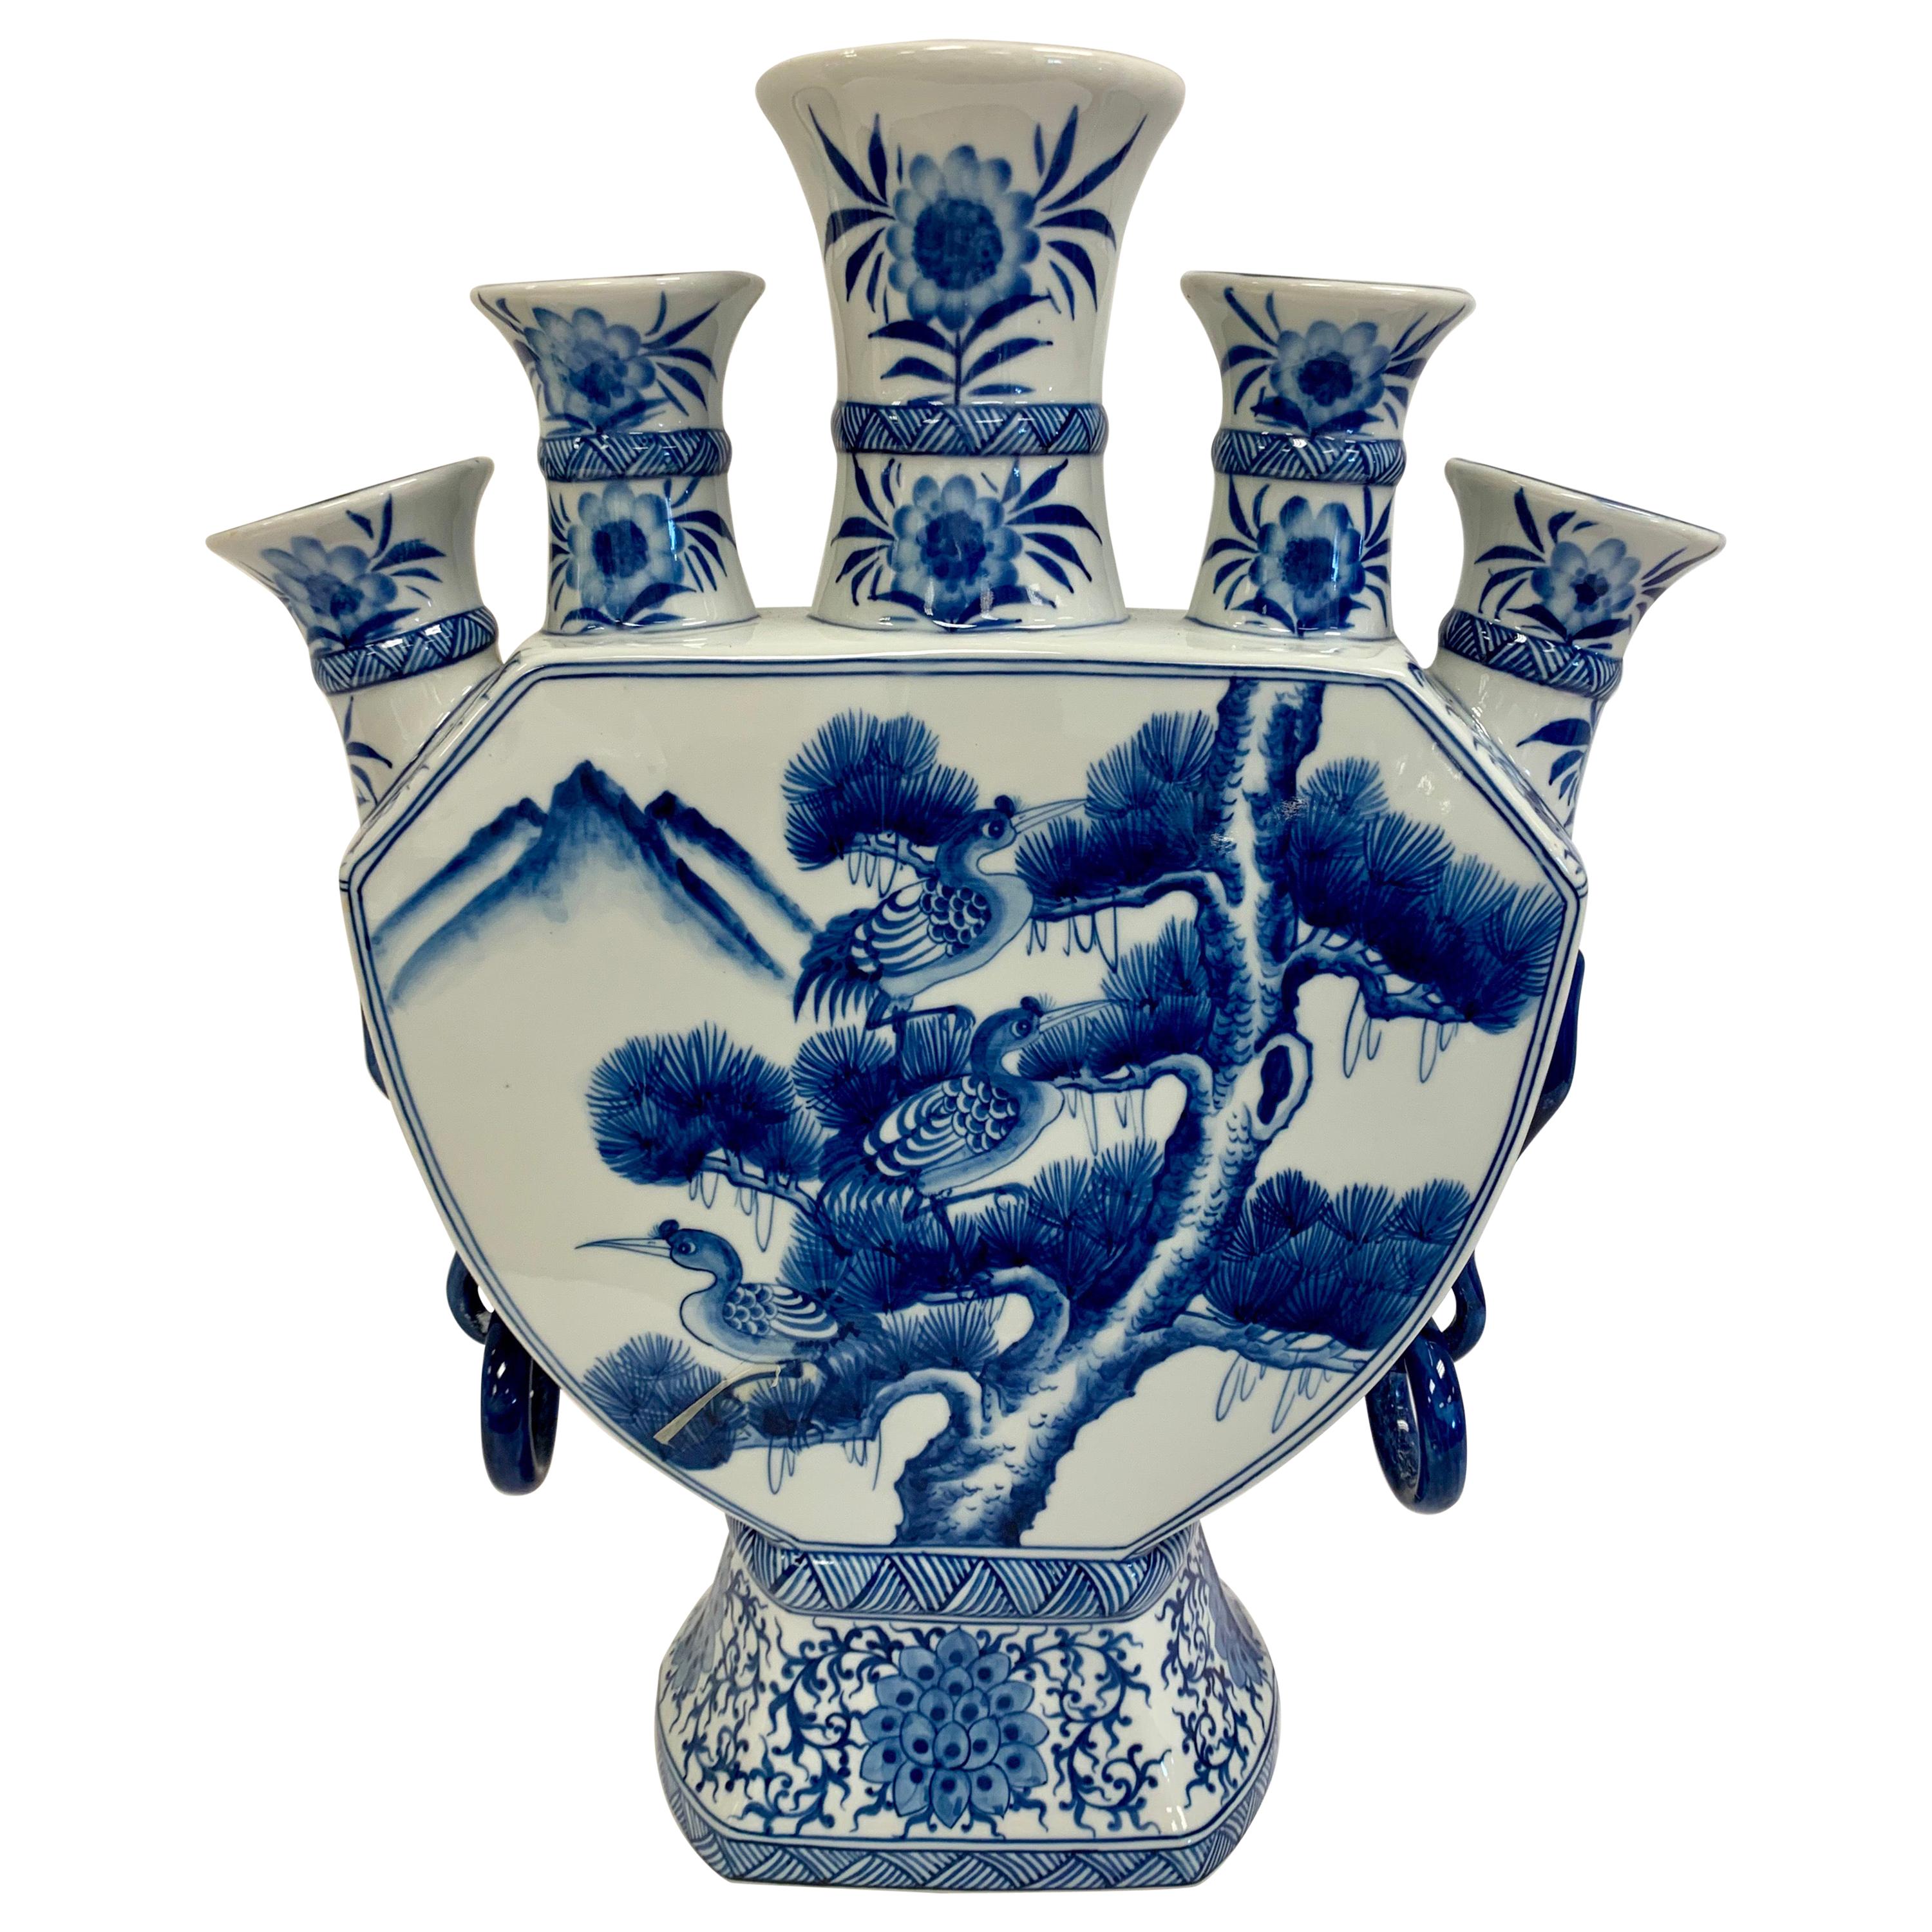 Chinese Blue and White Tulipiere Vase